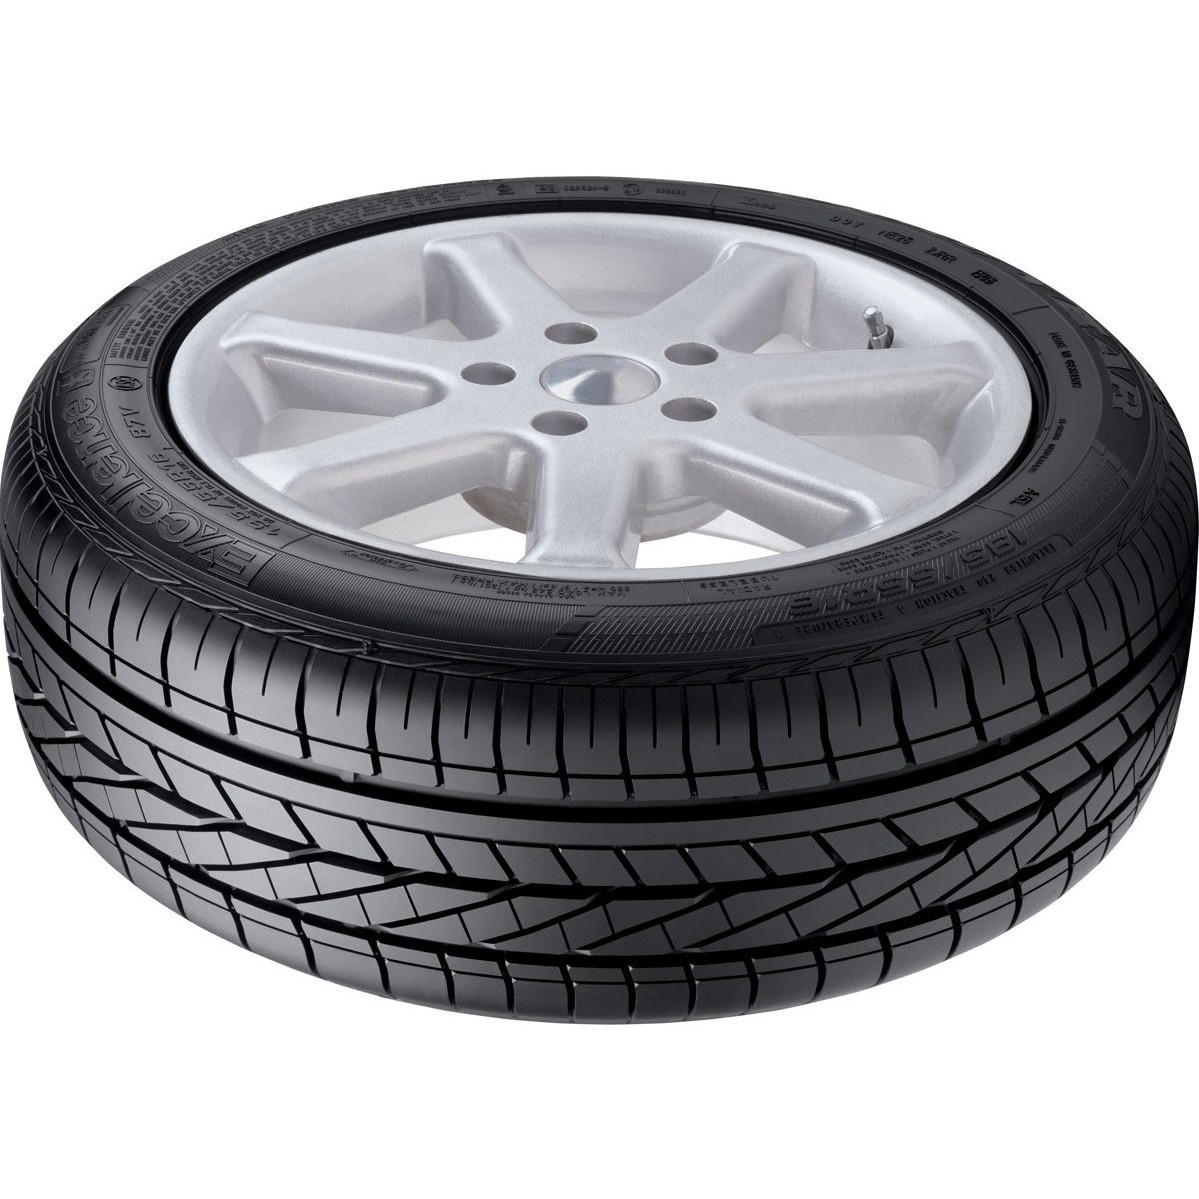 Goodyear company. Goodyear Excellence 195/65 r15. Goodyear Excellence 225/55 r17 97y. Goodyear Excellence 225/55 r17 97y RUNFLAT. Goodyear Excellence 225/45 r17 91w.